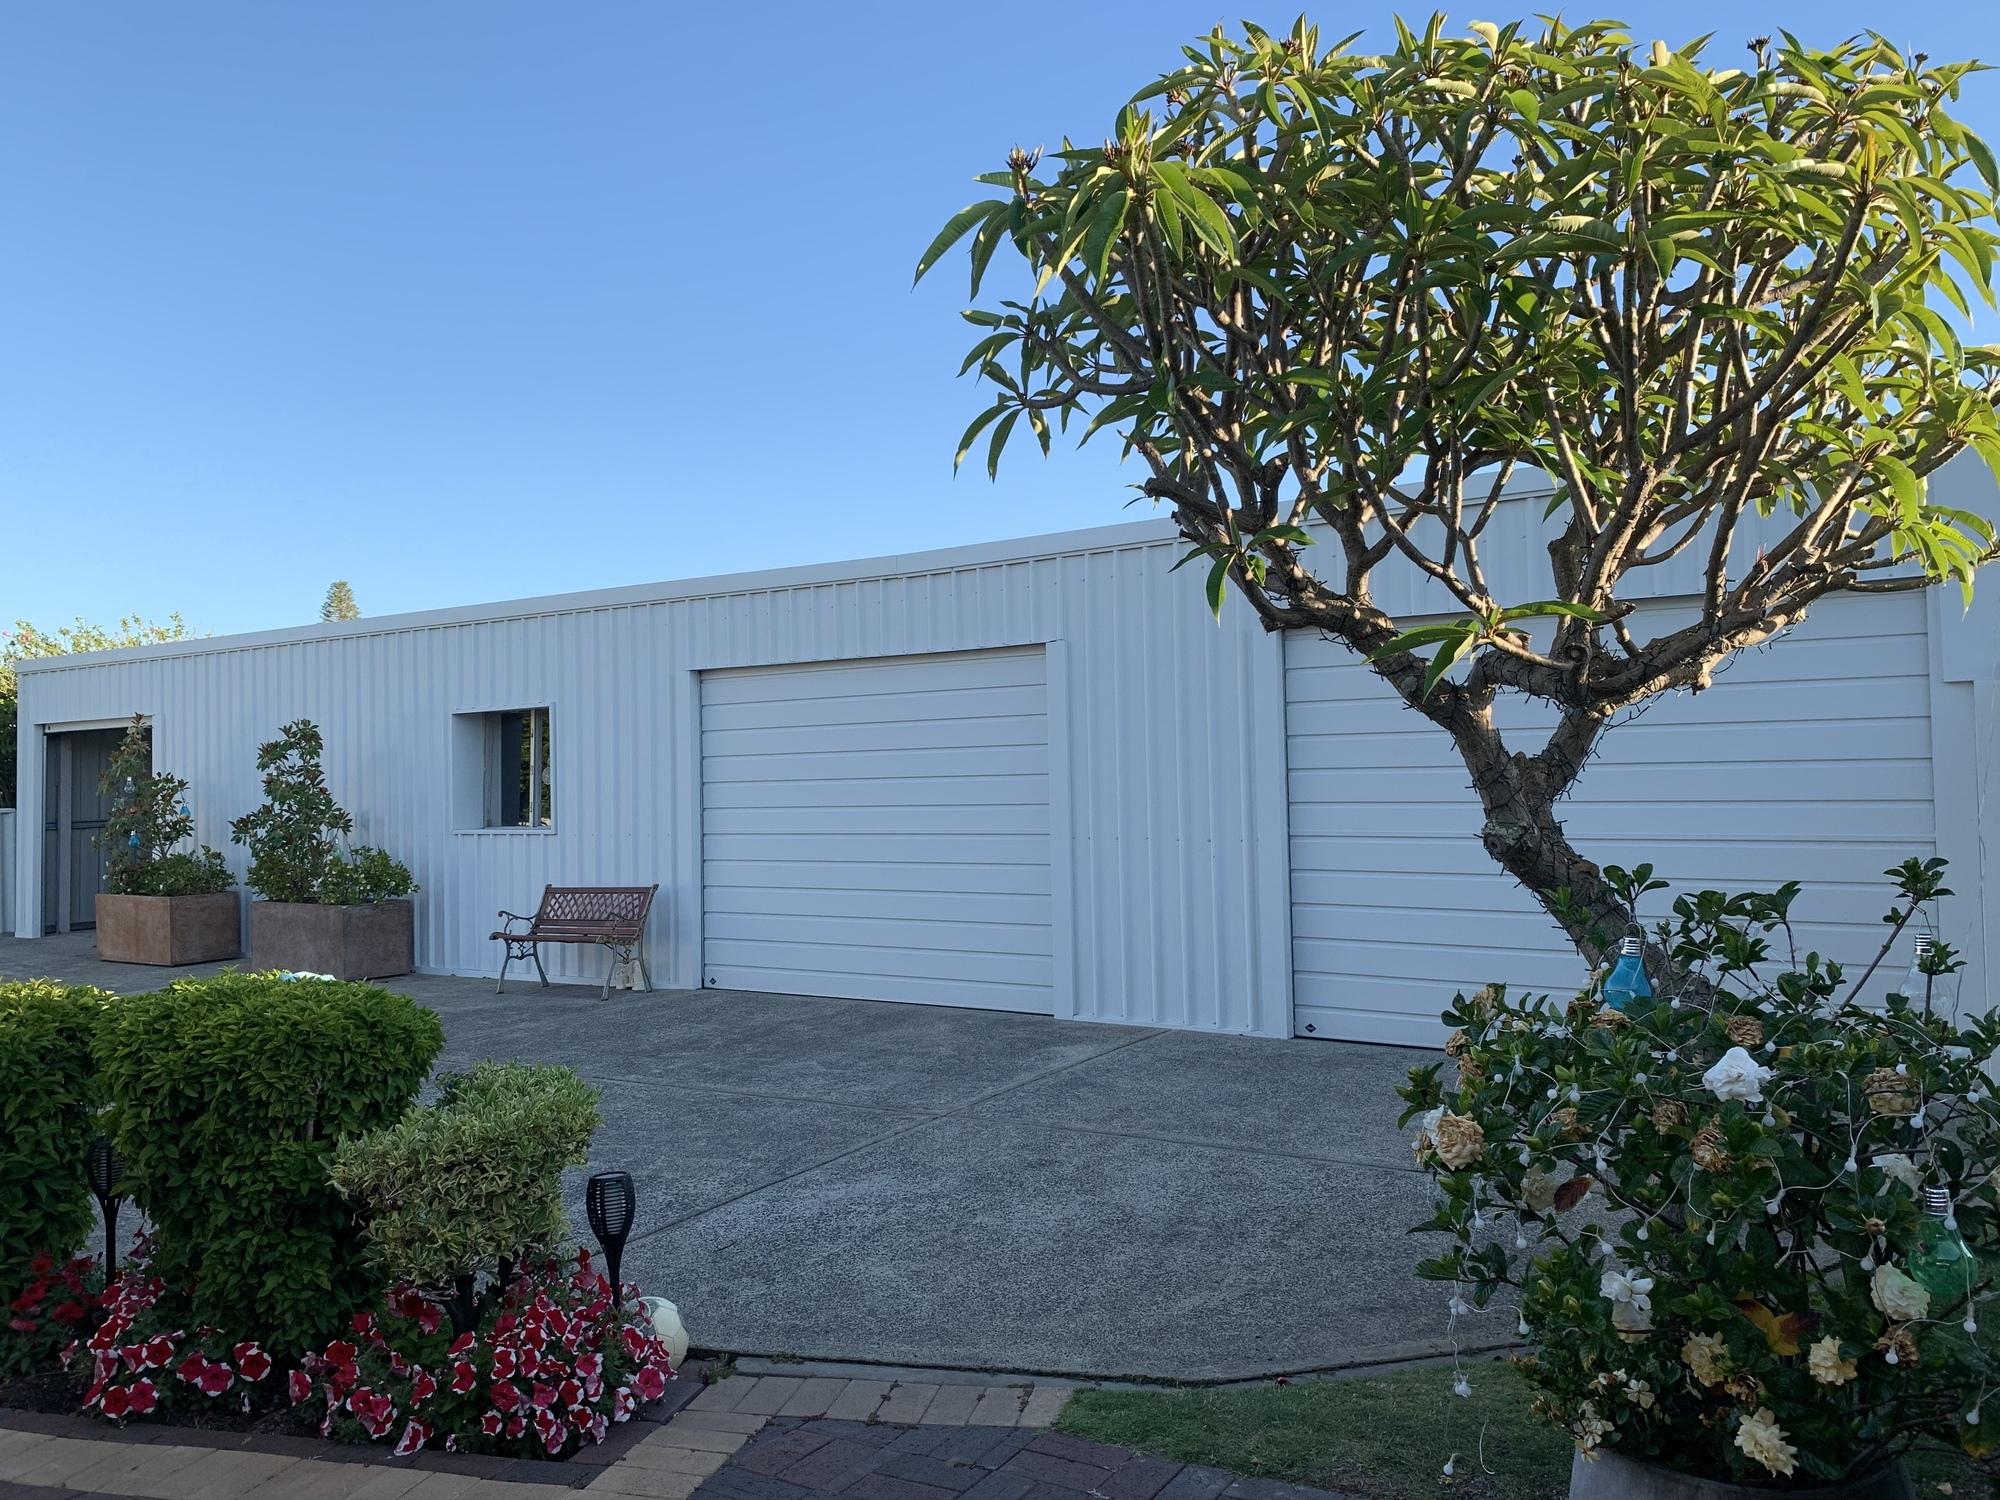 Tracy from Bunbury, WA loves COLORBOND® steel. Guttering & Fascia, Garage Doors, Sheds made from COLORBOND® steel in colour Surfmist® Matt